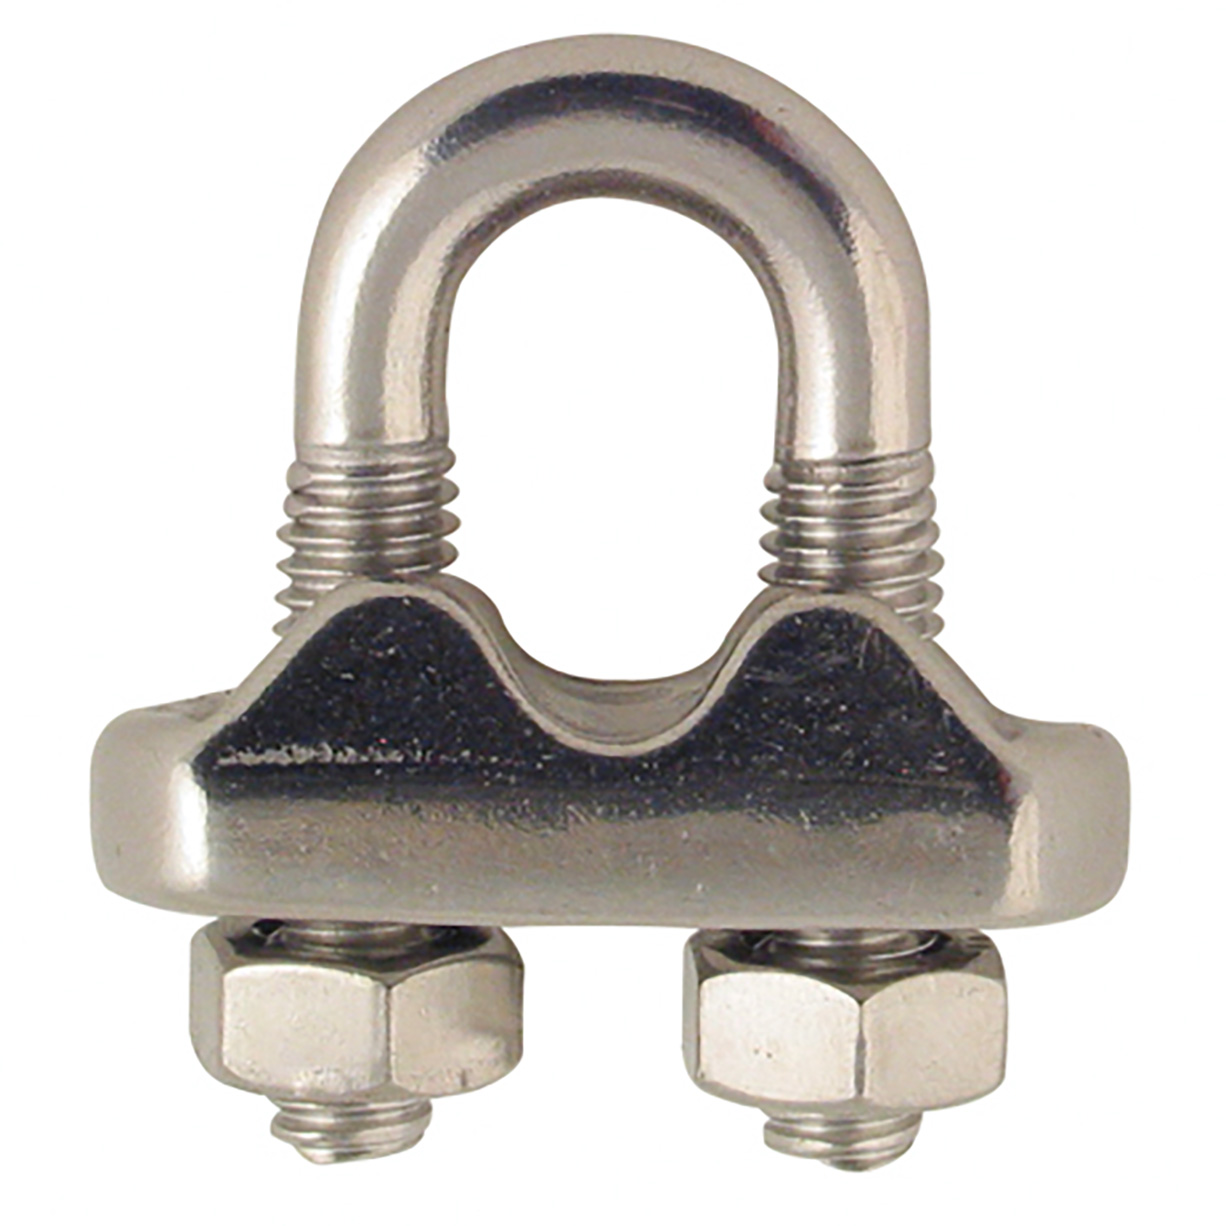 Stainless steel U-shaped clamp - Stainless seel - U shaped - 